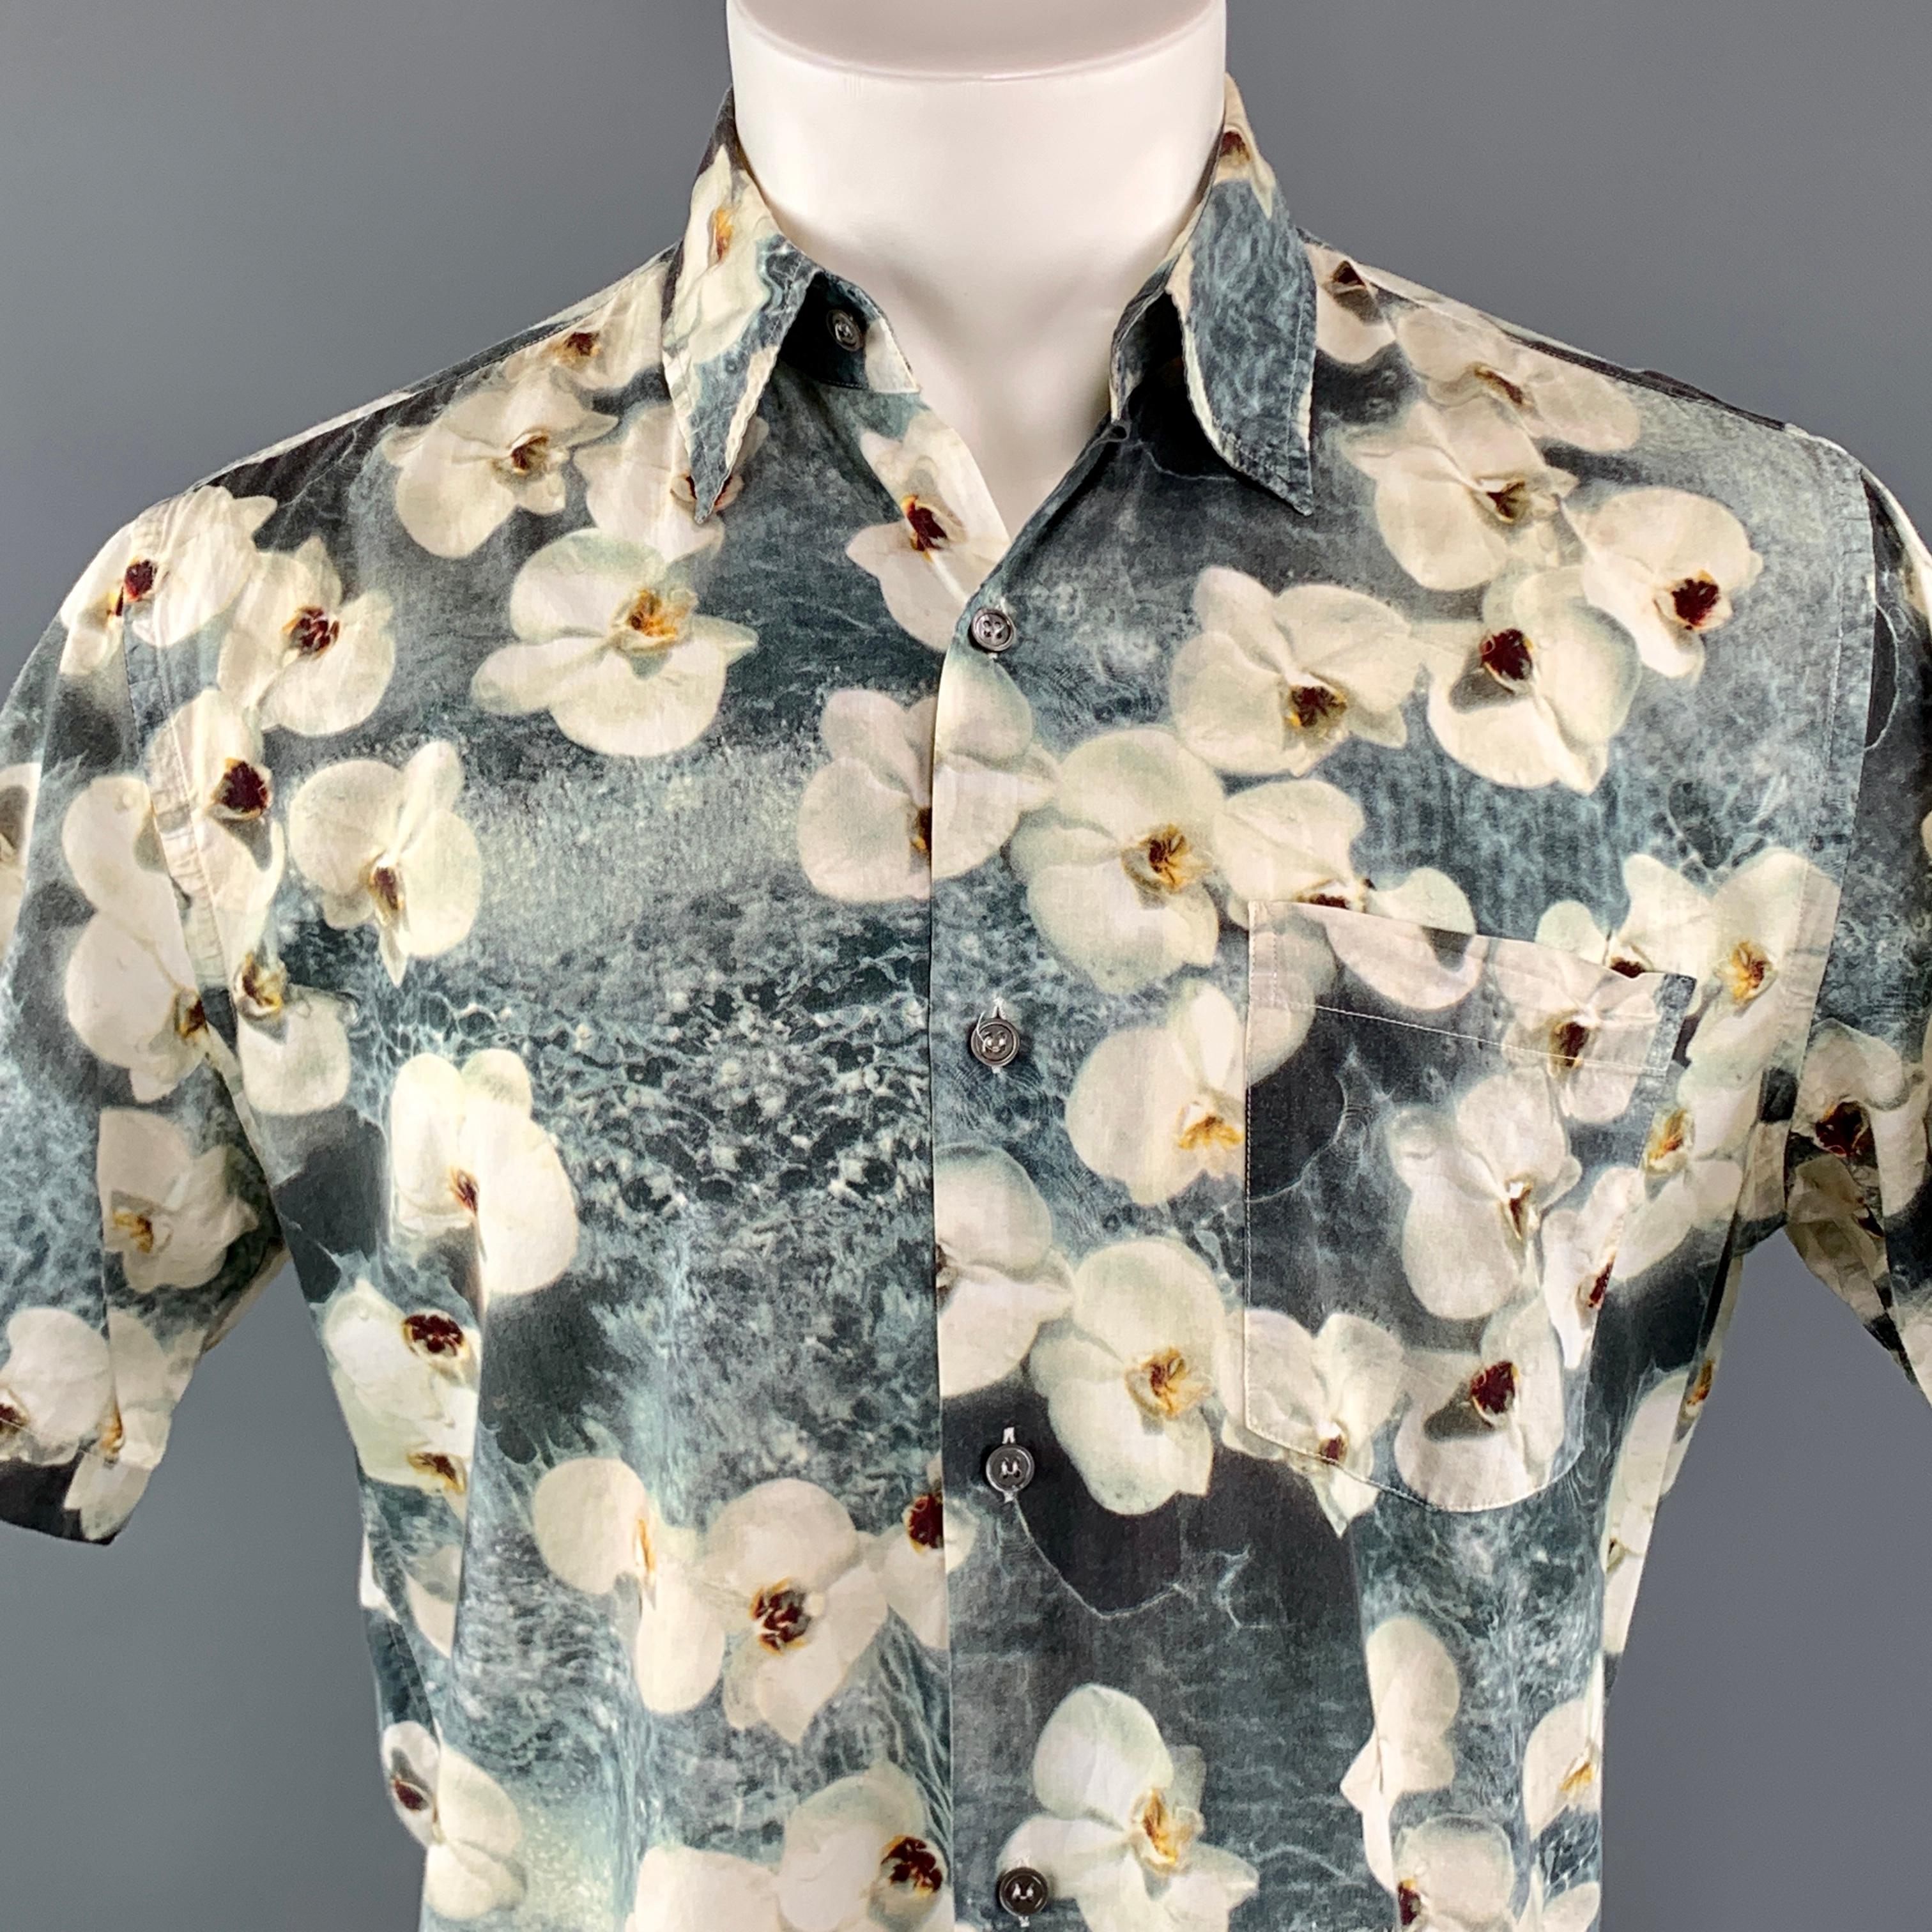 PAUL SMITH Short Sleeve Shirt comes in gray tones in a floral 